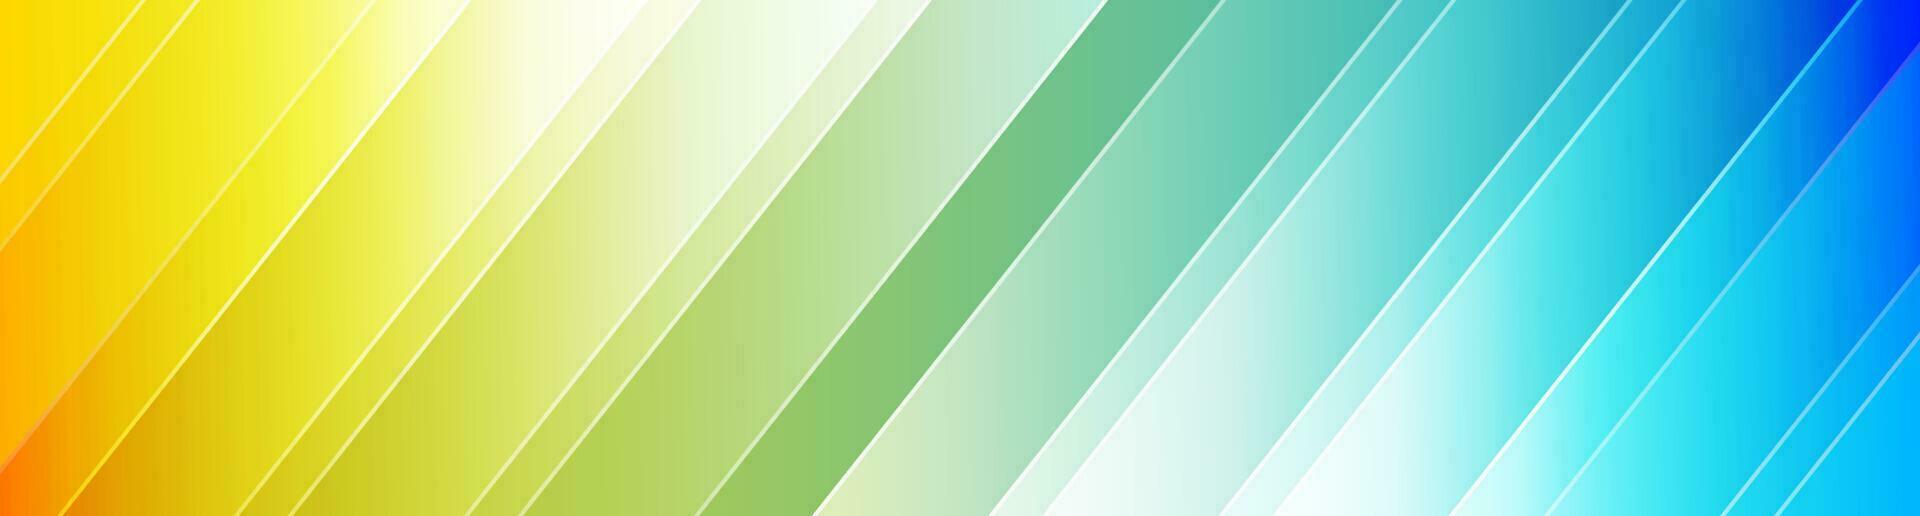 3D colorful geometric abstract background overlap layer on bright space with stripes effect decoration. Graphic design element modern style concept for banner, flyer, card, cover, or brochure vector